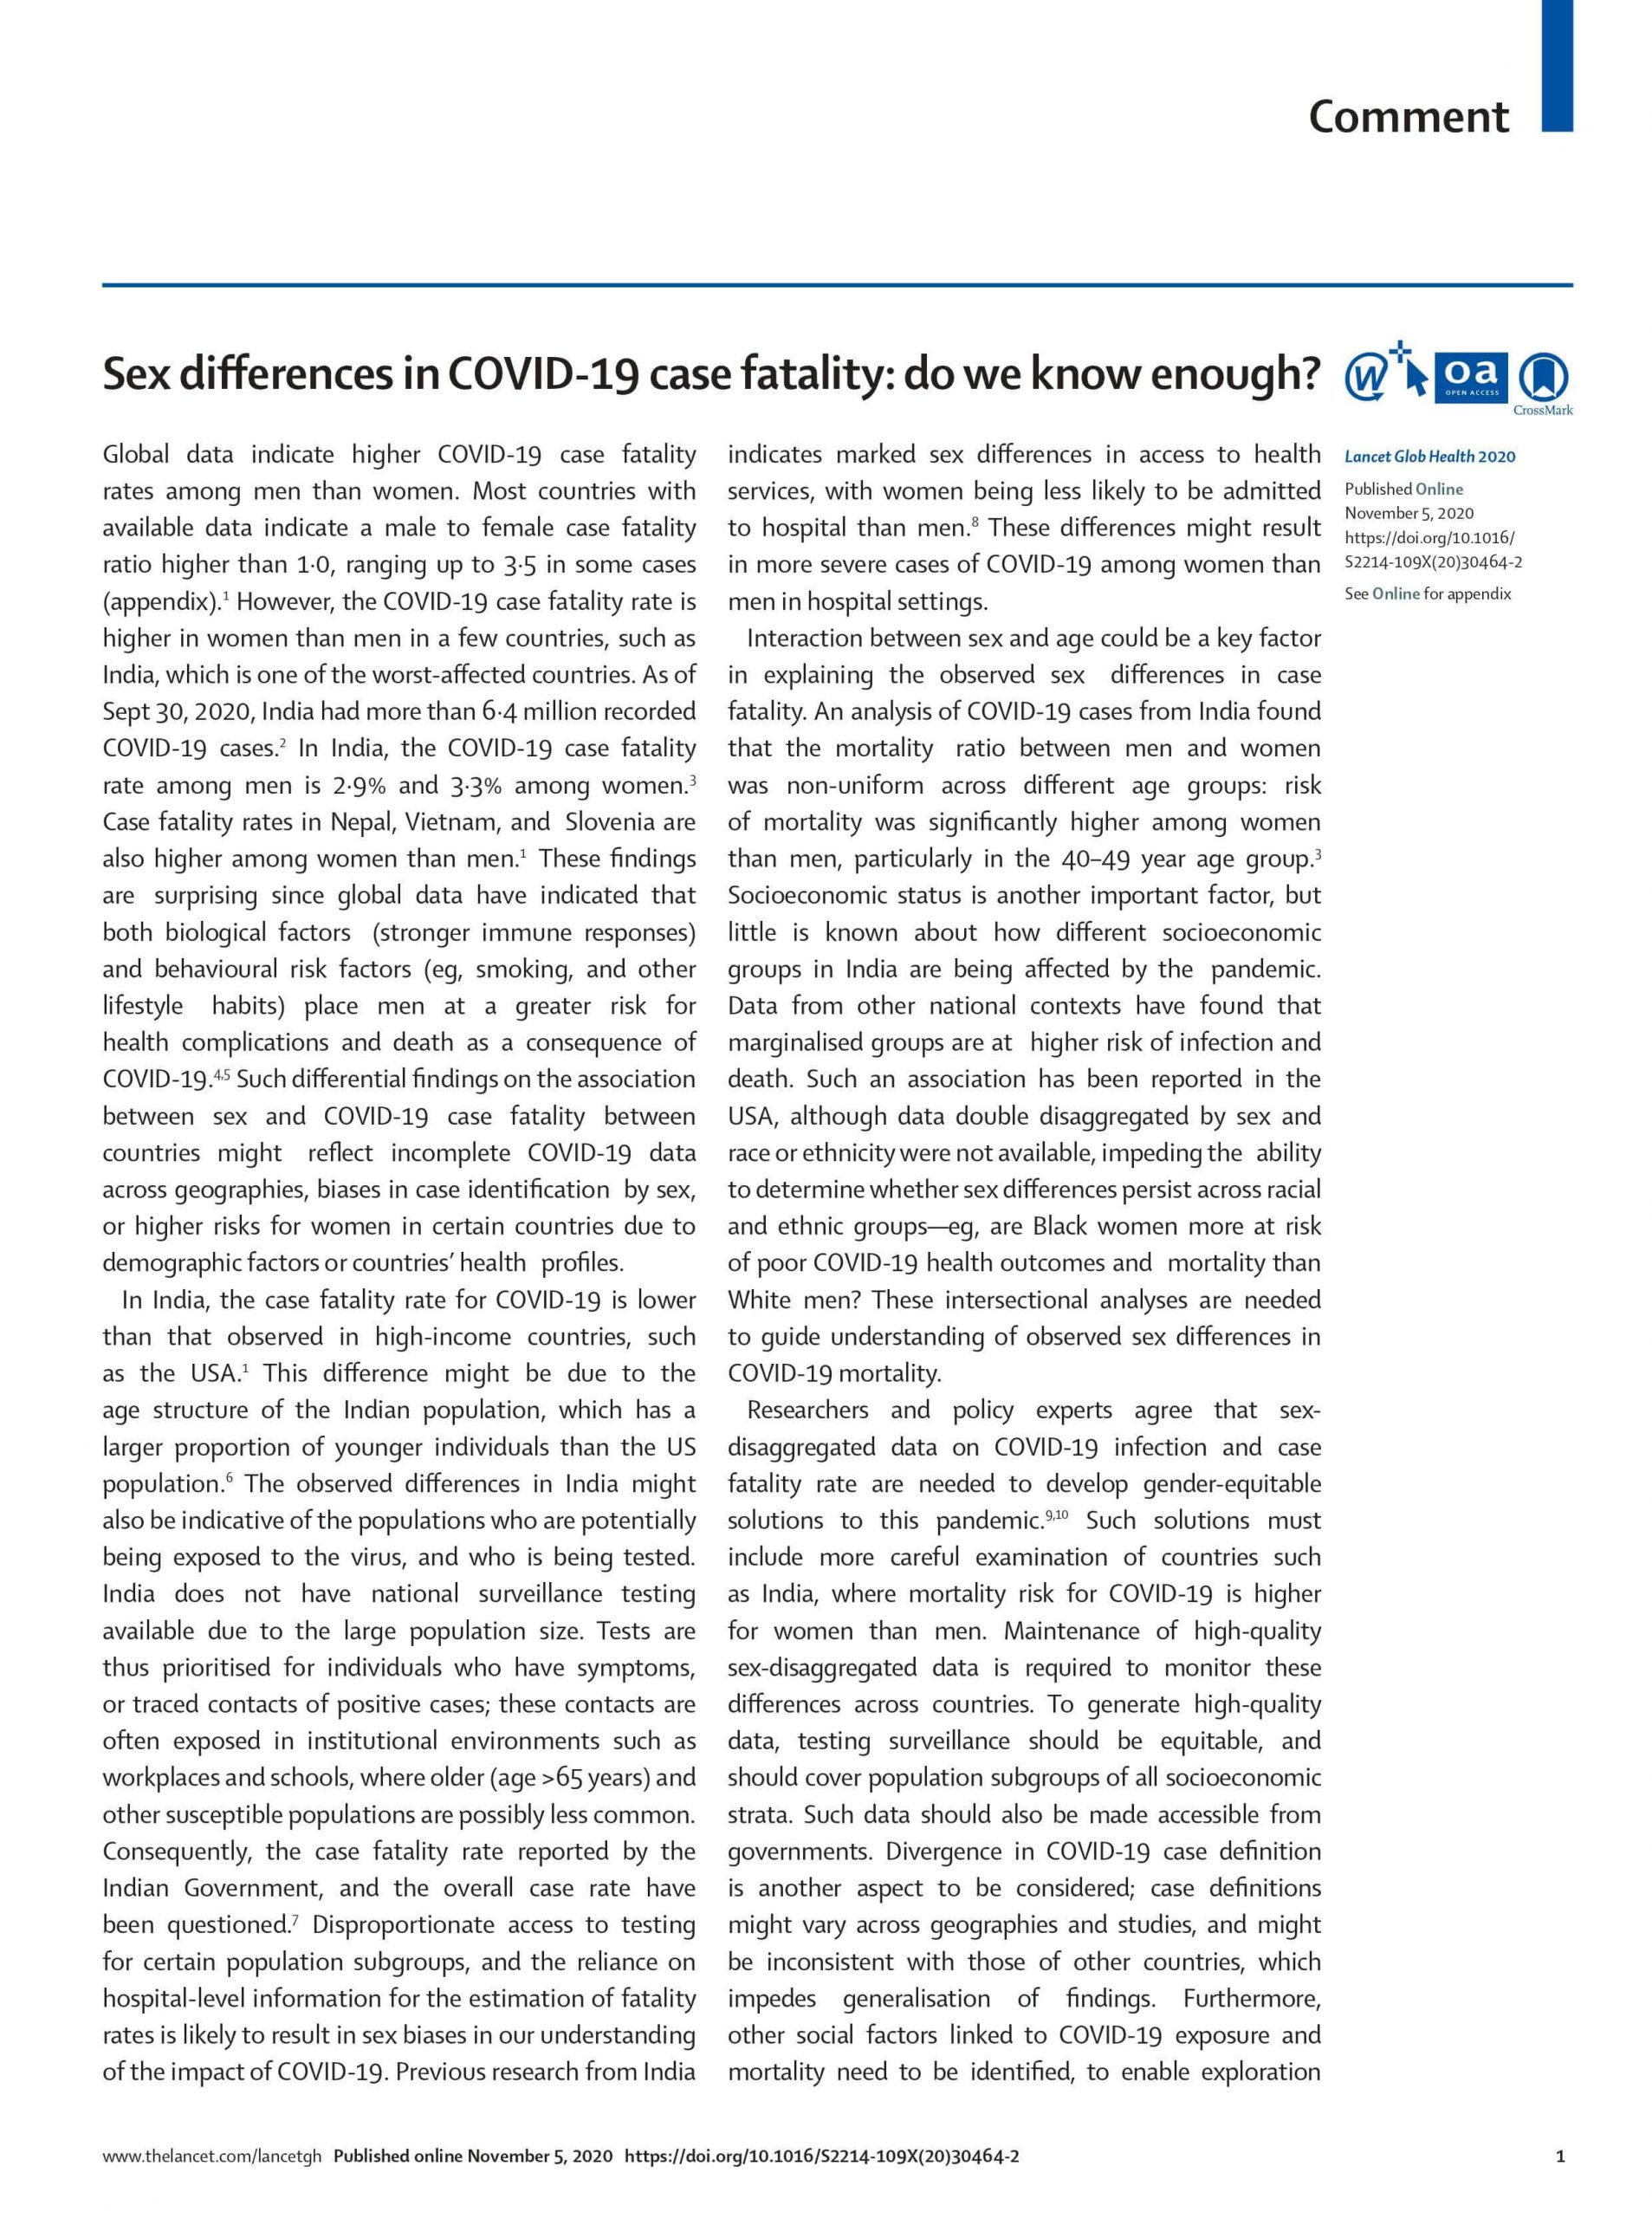 Sex differences in COVID-19 case fatality